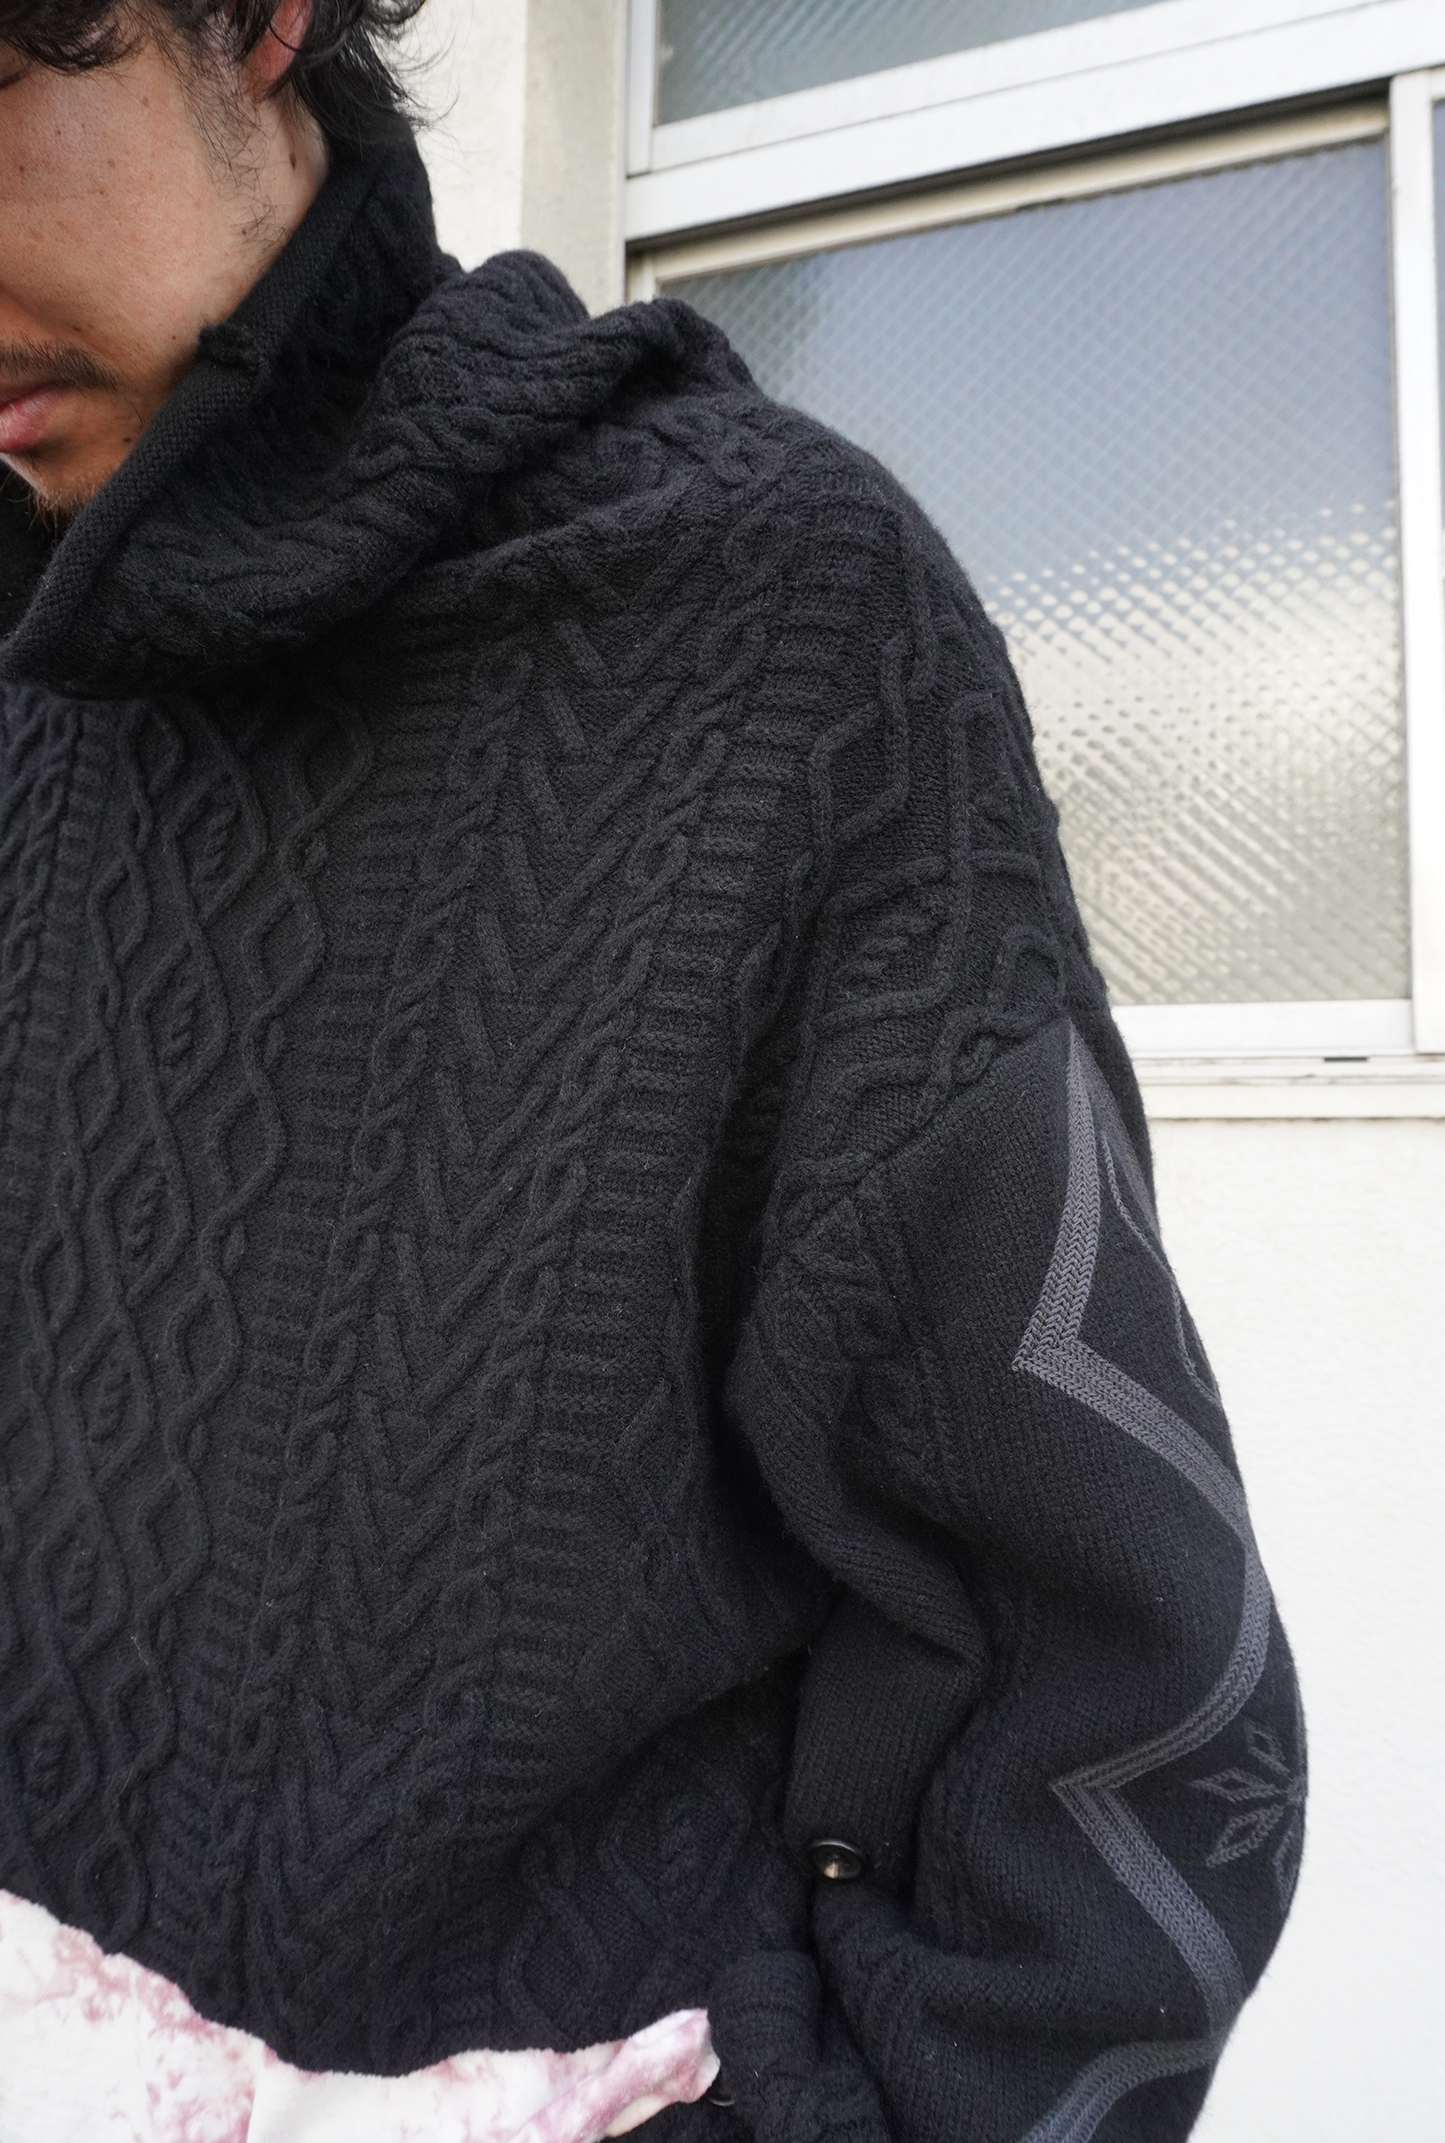 Over Knit Armor "FLOWERS"